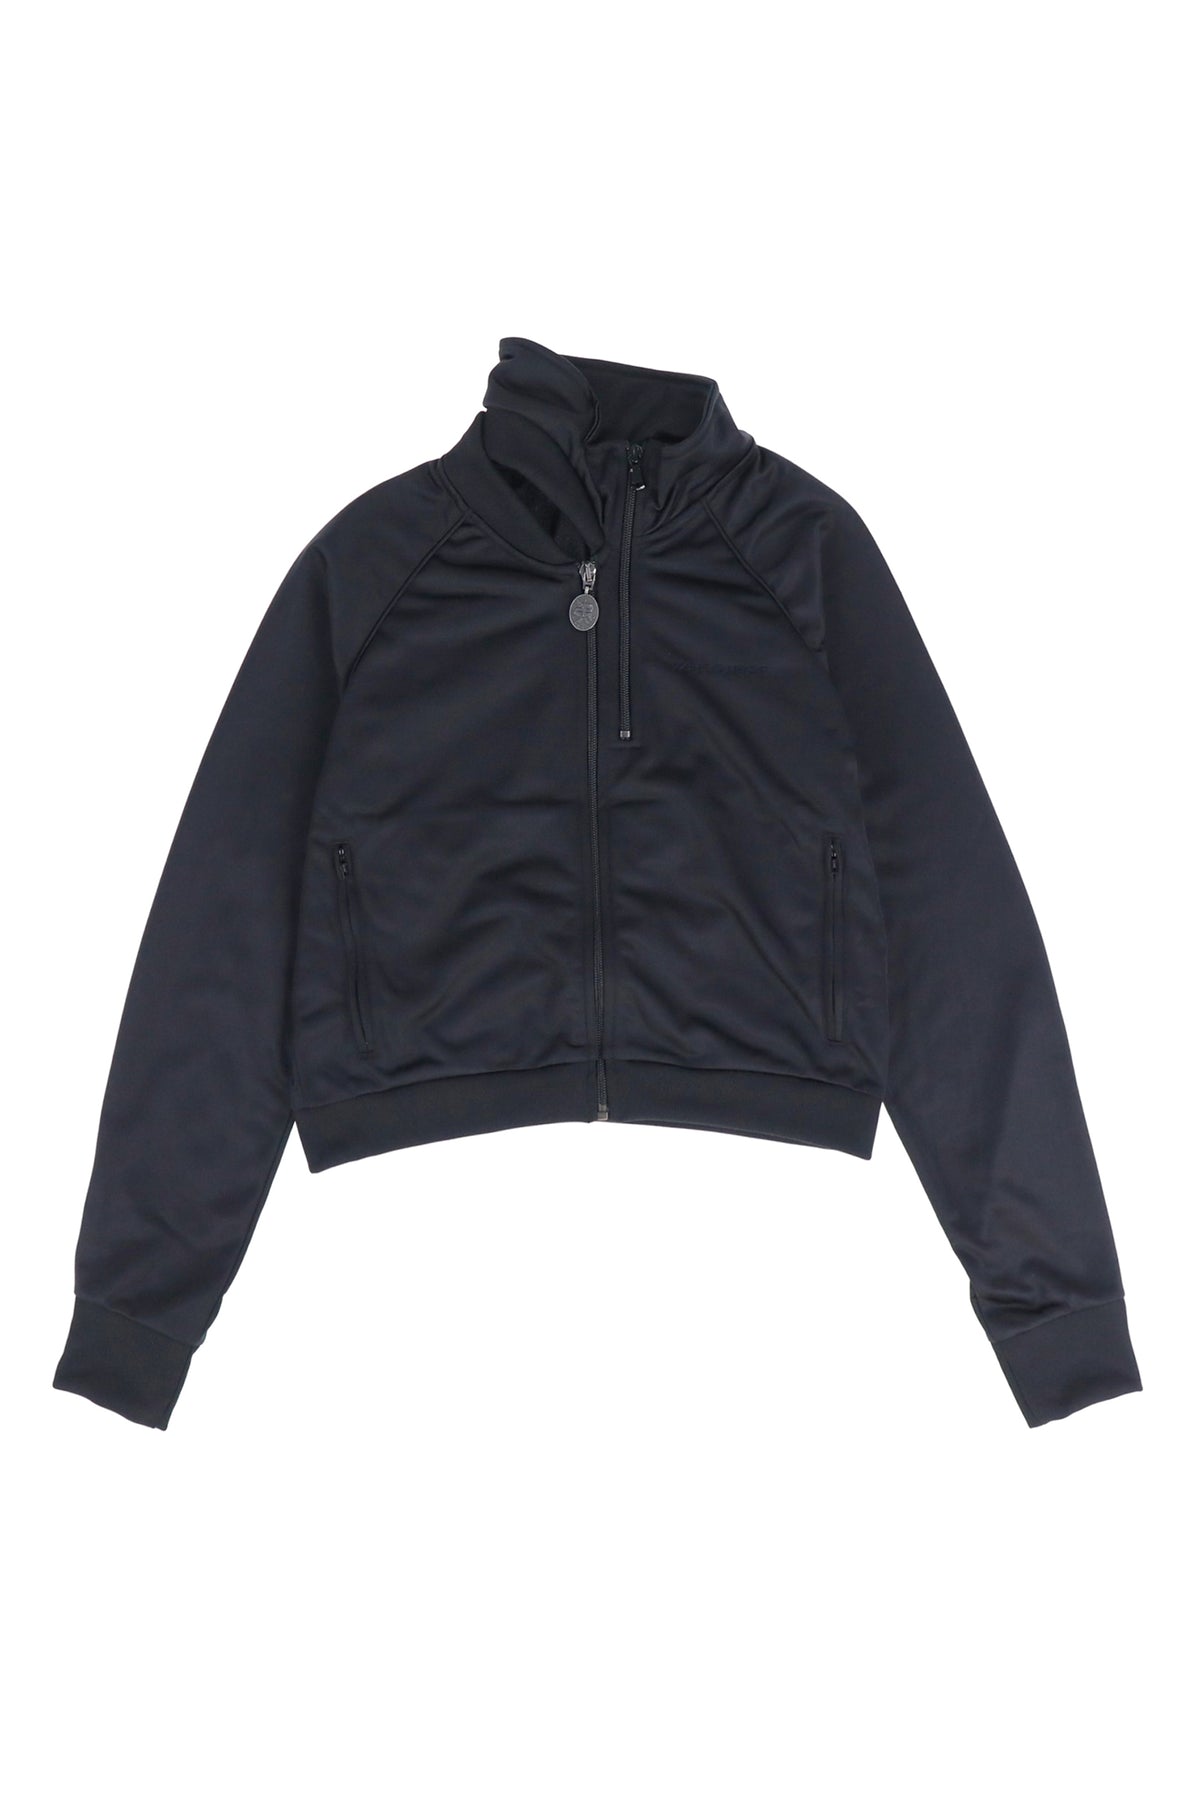 DOUBLE COLLAR TRACK JACKET / BLK